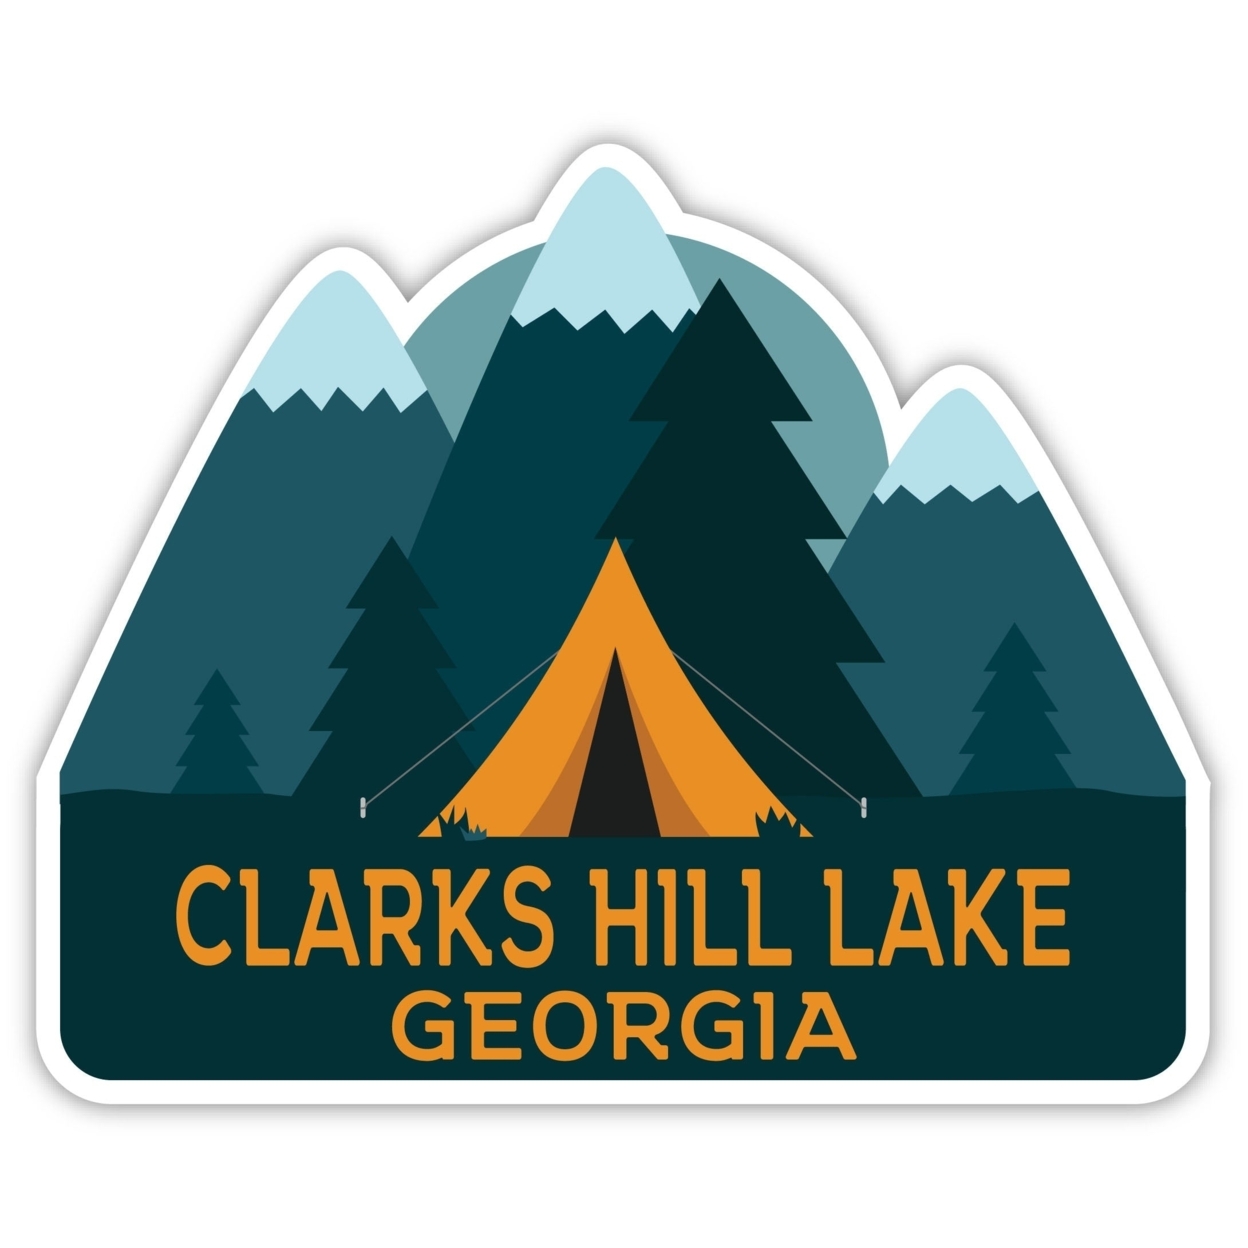 Clarks Hill Lake Georgia Souvenir Decorative Stickers (Choose Theme And Size) - 4-Pack, 10-Inch, Bear